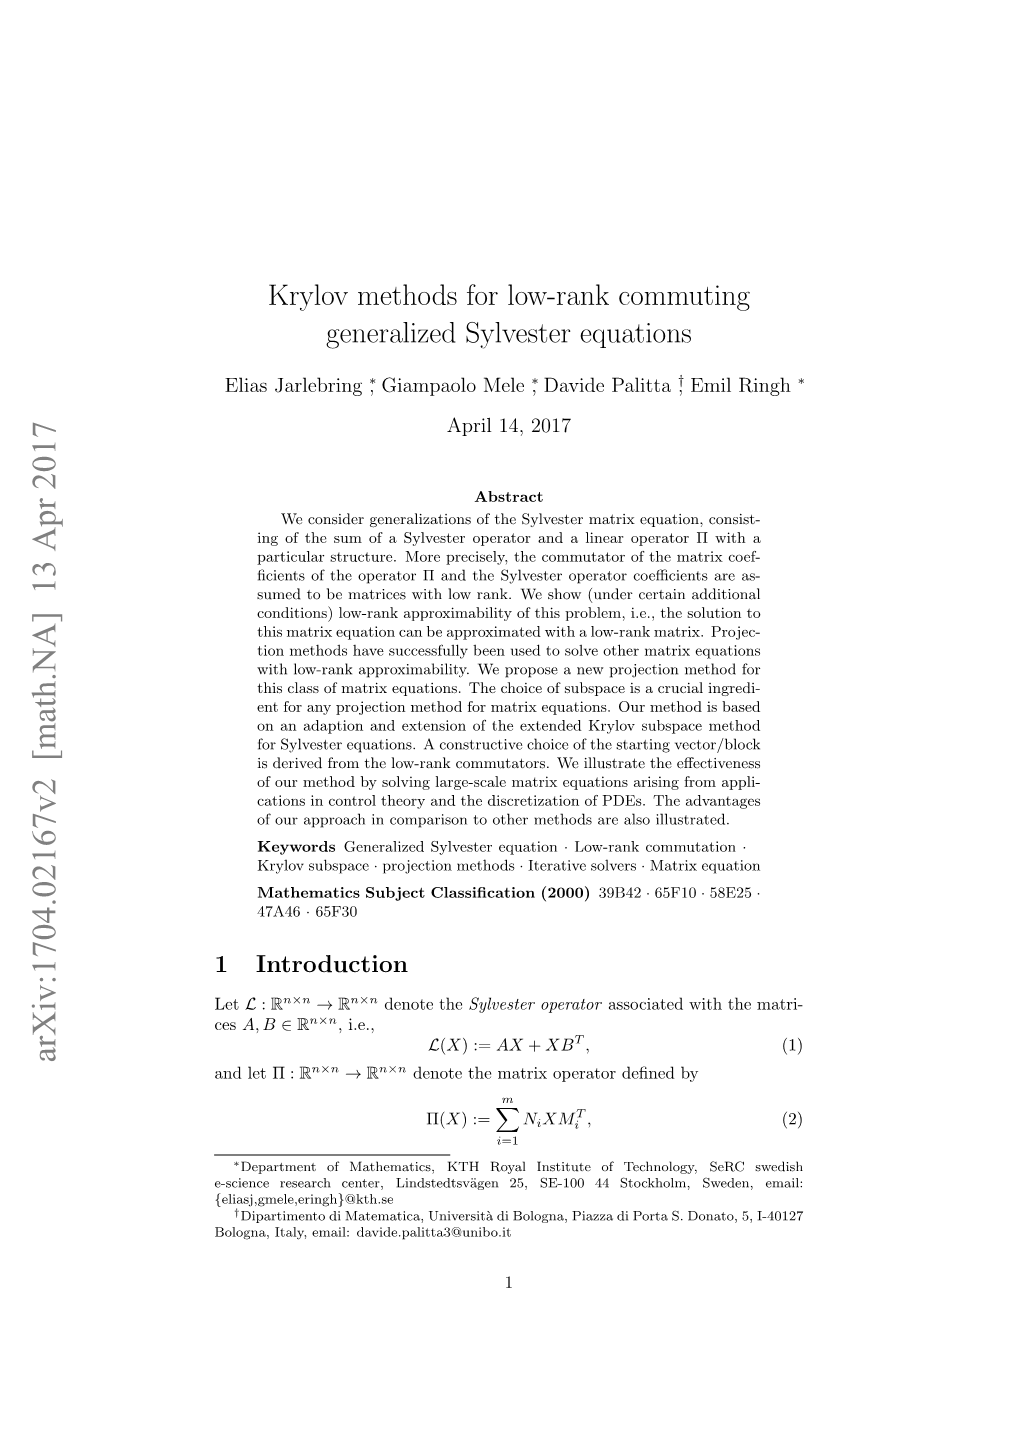 Krylov Methods for Low-Rank Commuting Generalized Sylvester Equations